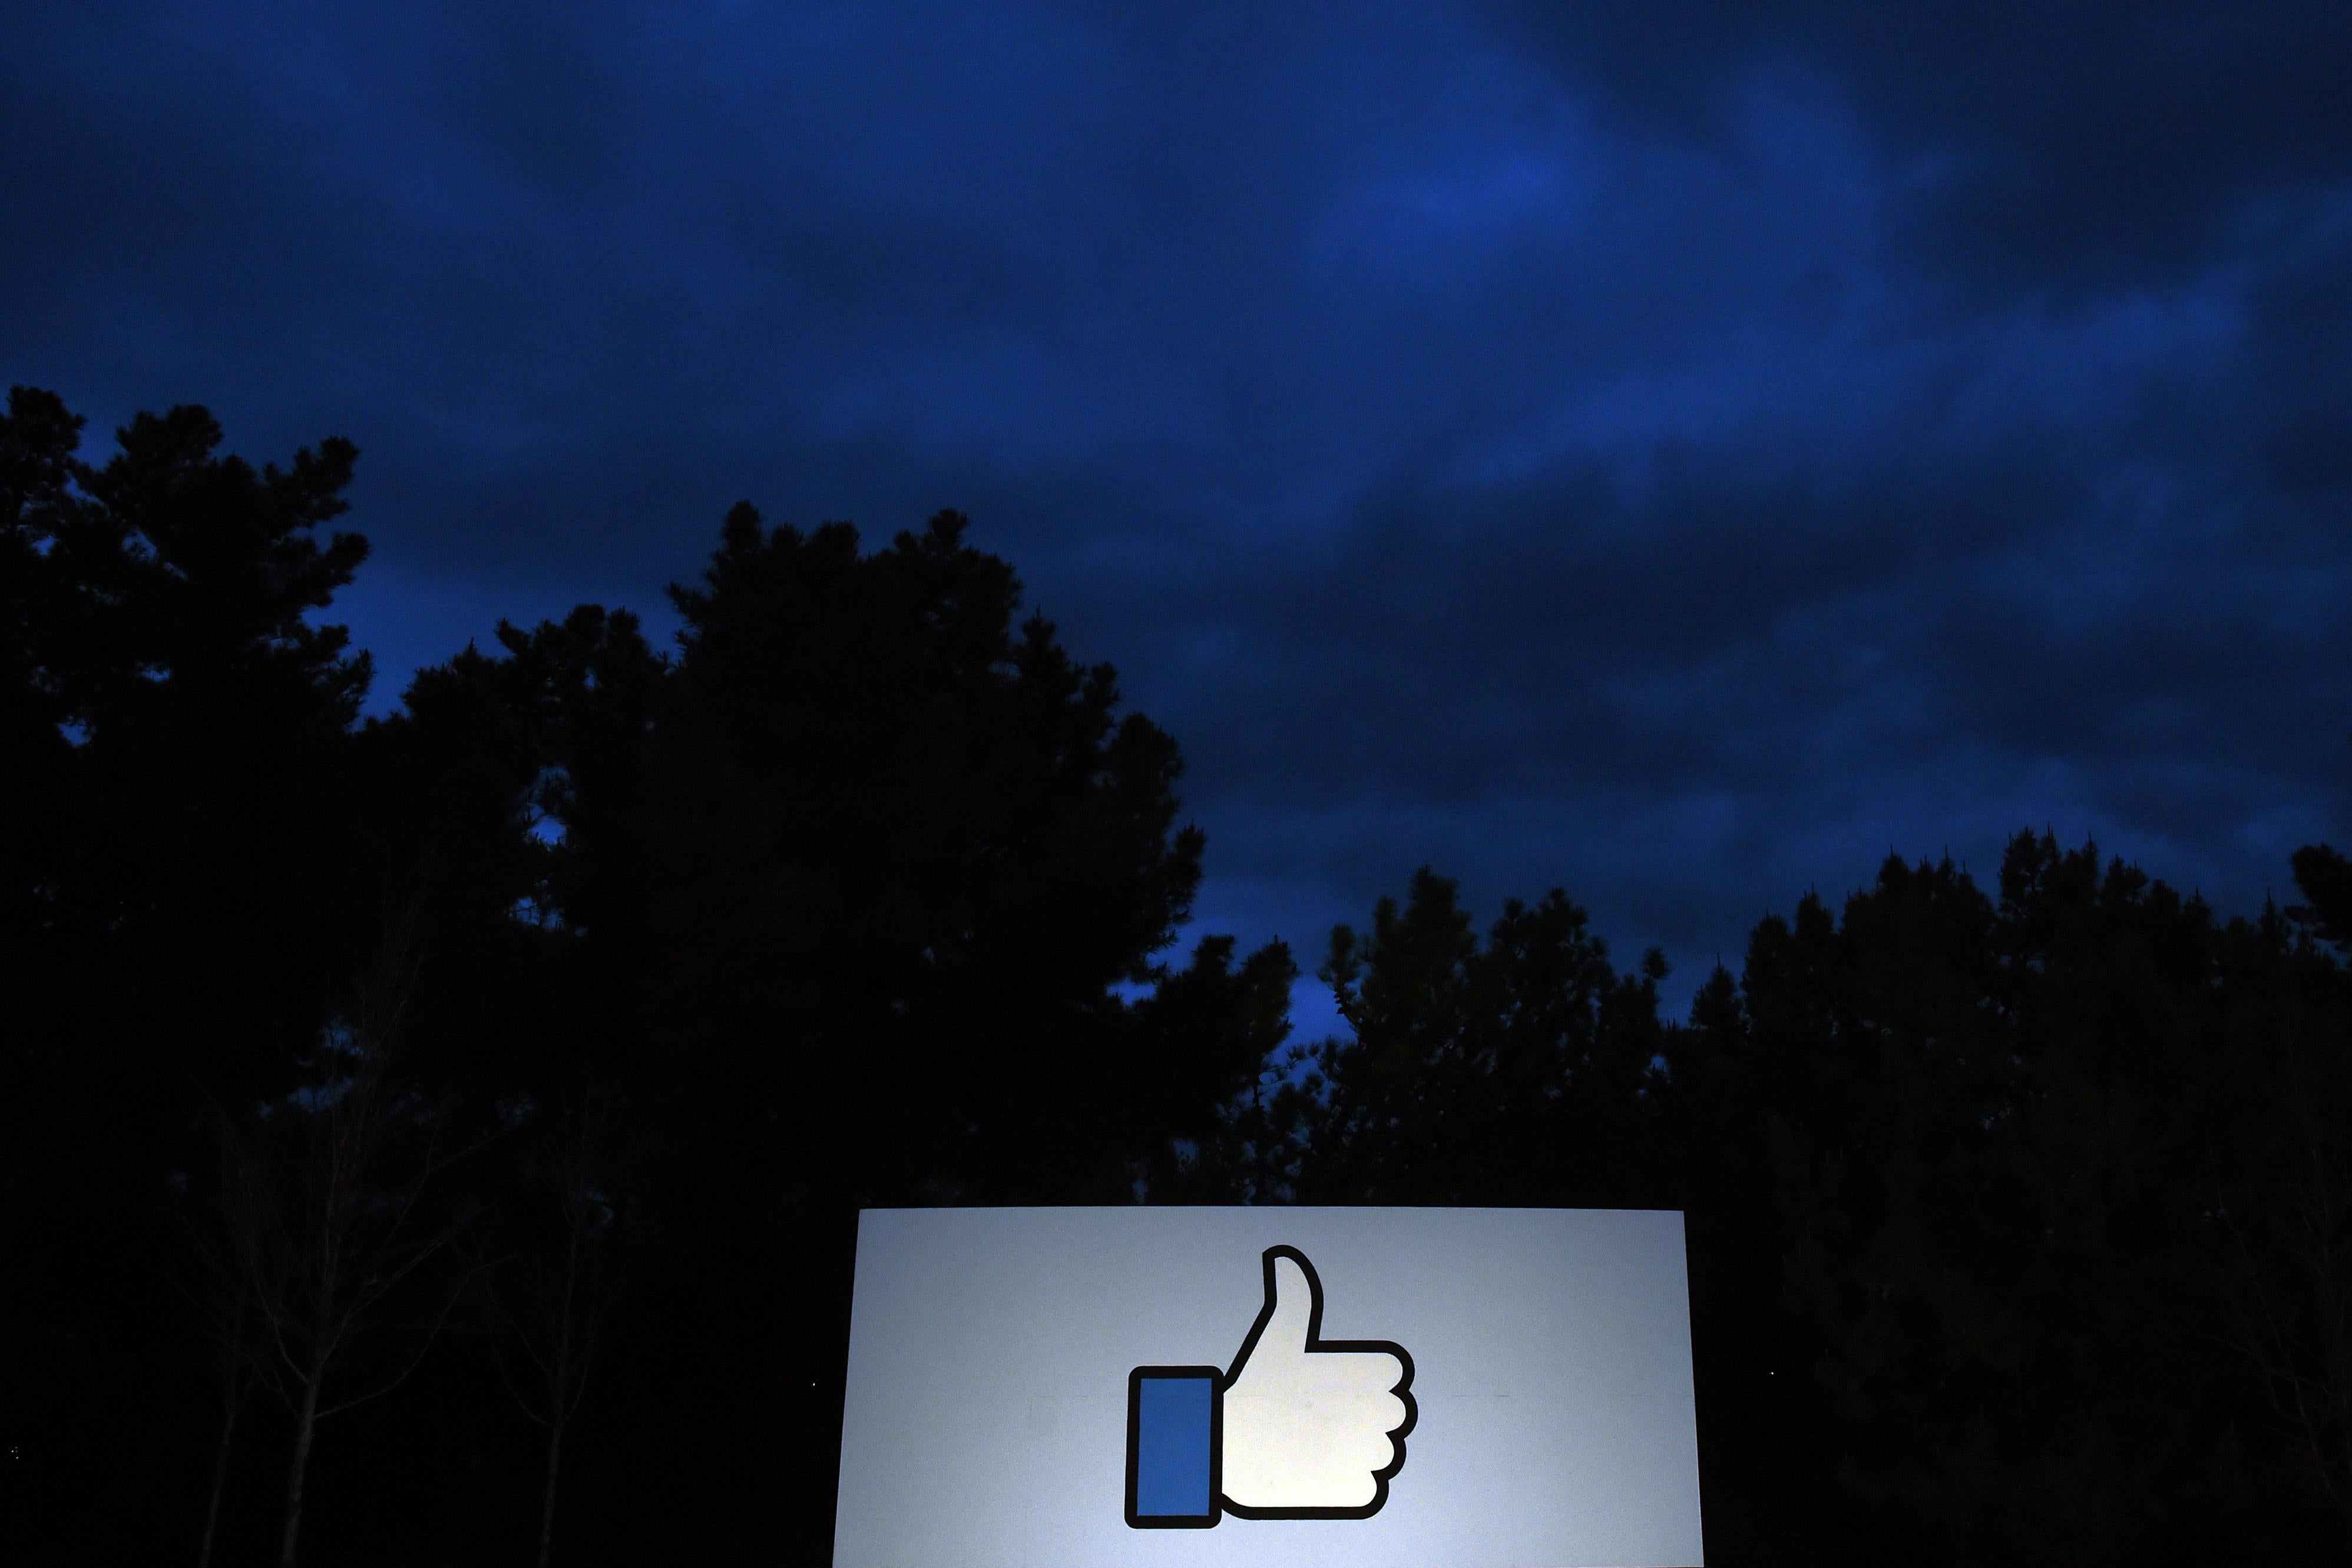 A lit sign is seen at the entrance to Facebook's corporate headquarters location in Menlo Park, California on March 21, 2018. 
Facebook chief Mark Zuckerberg vowed on March 21 to 'step up' to fix problems at the social media giant, as it fights a snowballing scandal over the hijacking of personal data from millions of its users. / AFP PHOTO / JOSH EDELSON        (Photo credit should read JOSH EDELSON/AFP/Getty Images)